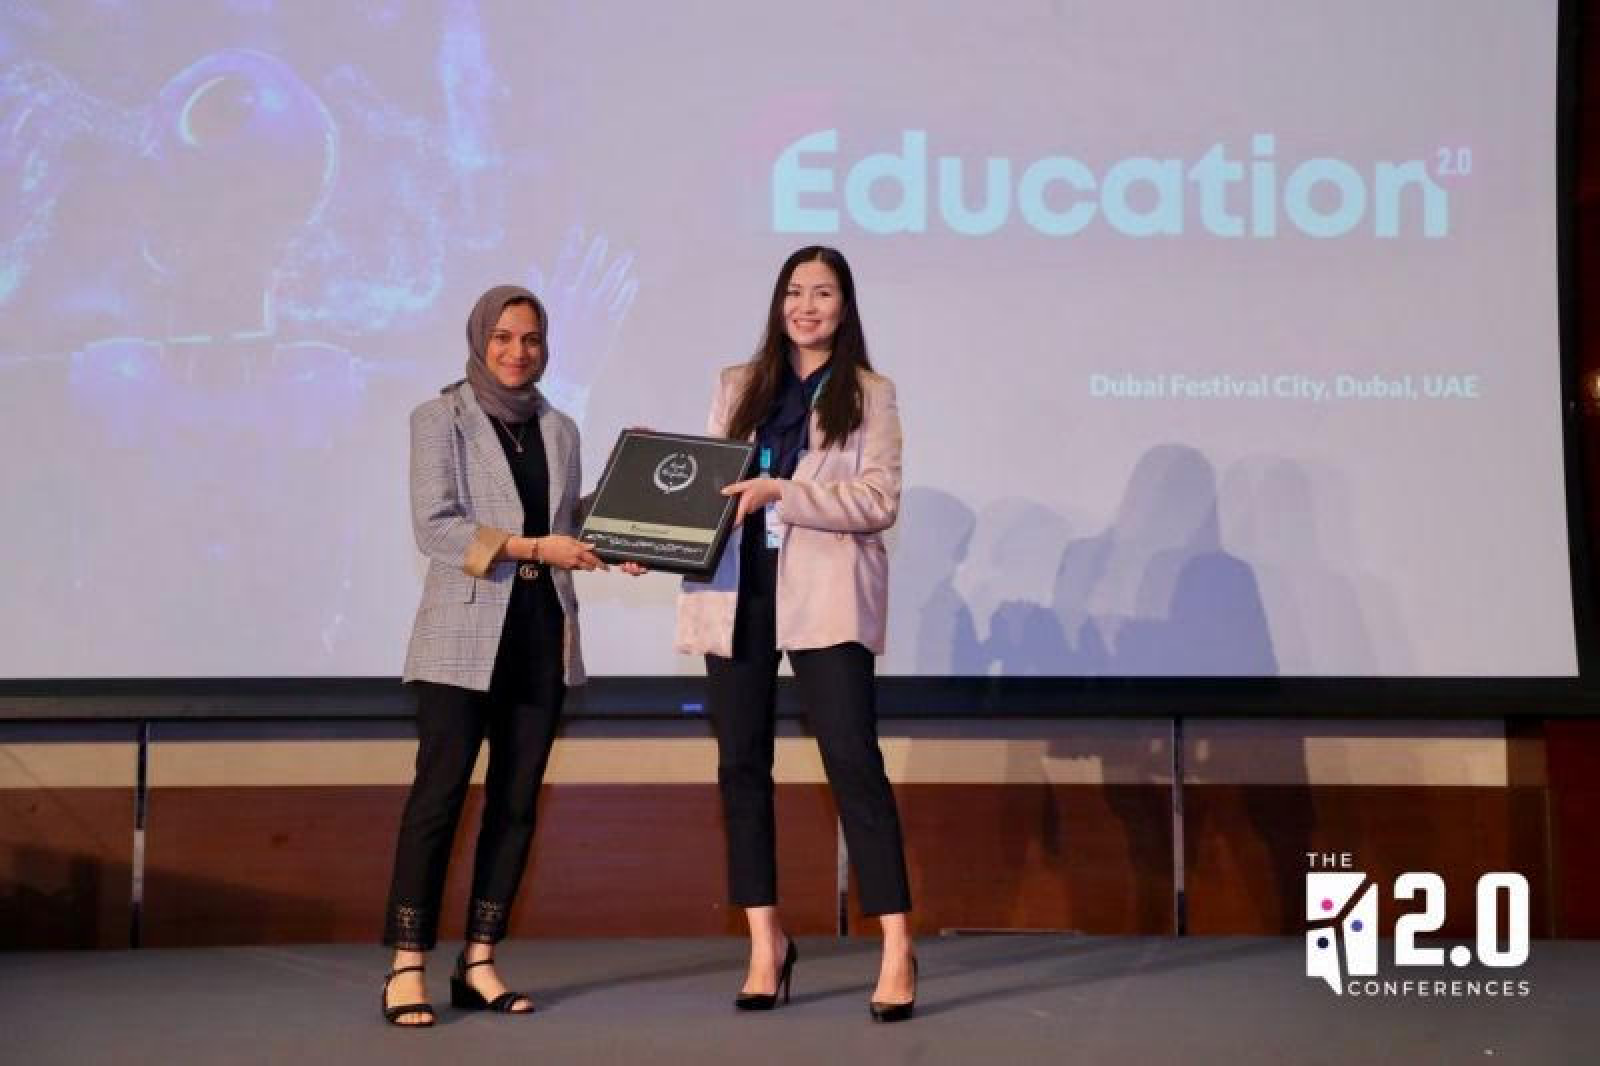 Baobabooks Co-founder Soukeina Mamodhoussen Recognized with Outstanding Leadership in Education Award at the Education 2.0 Conference